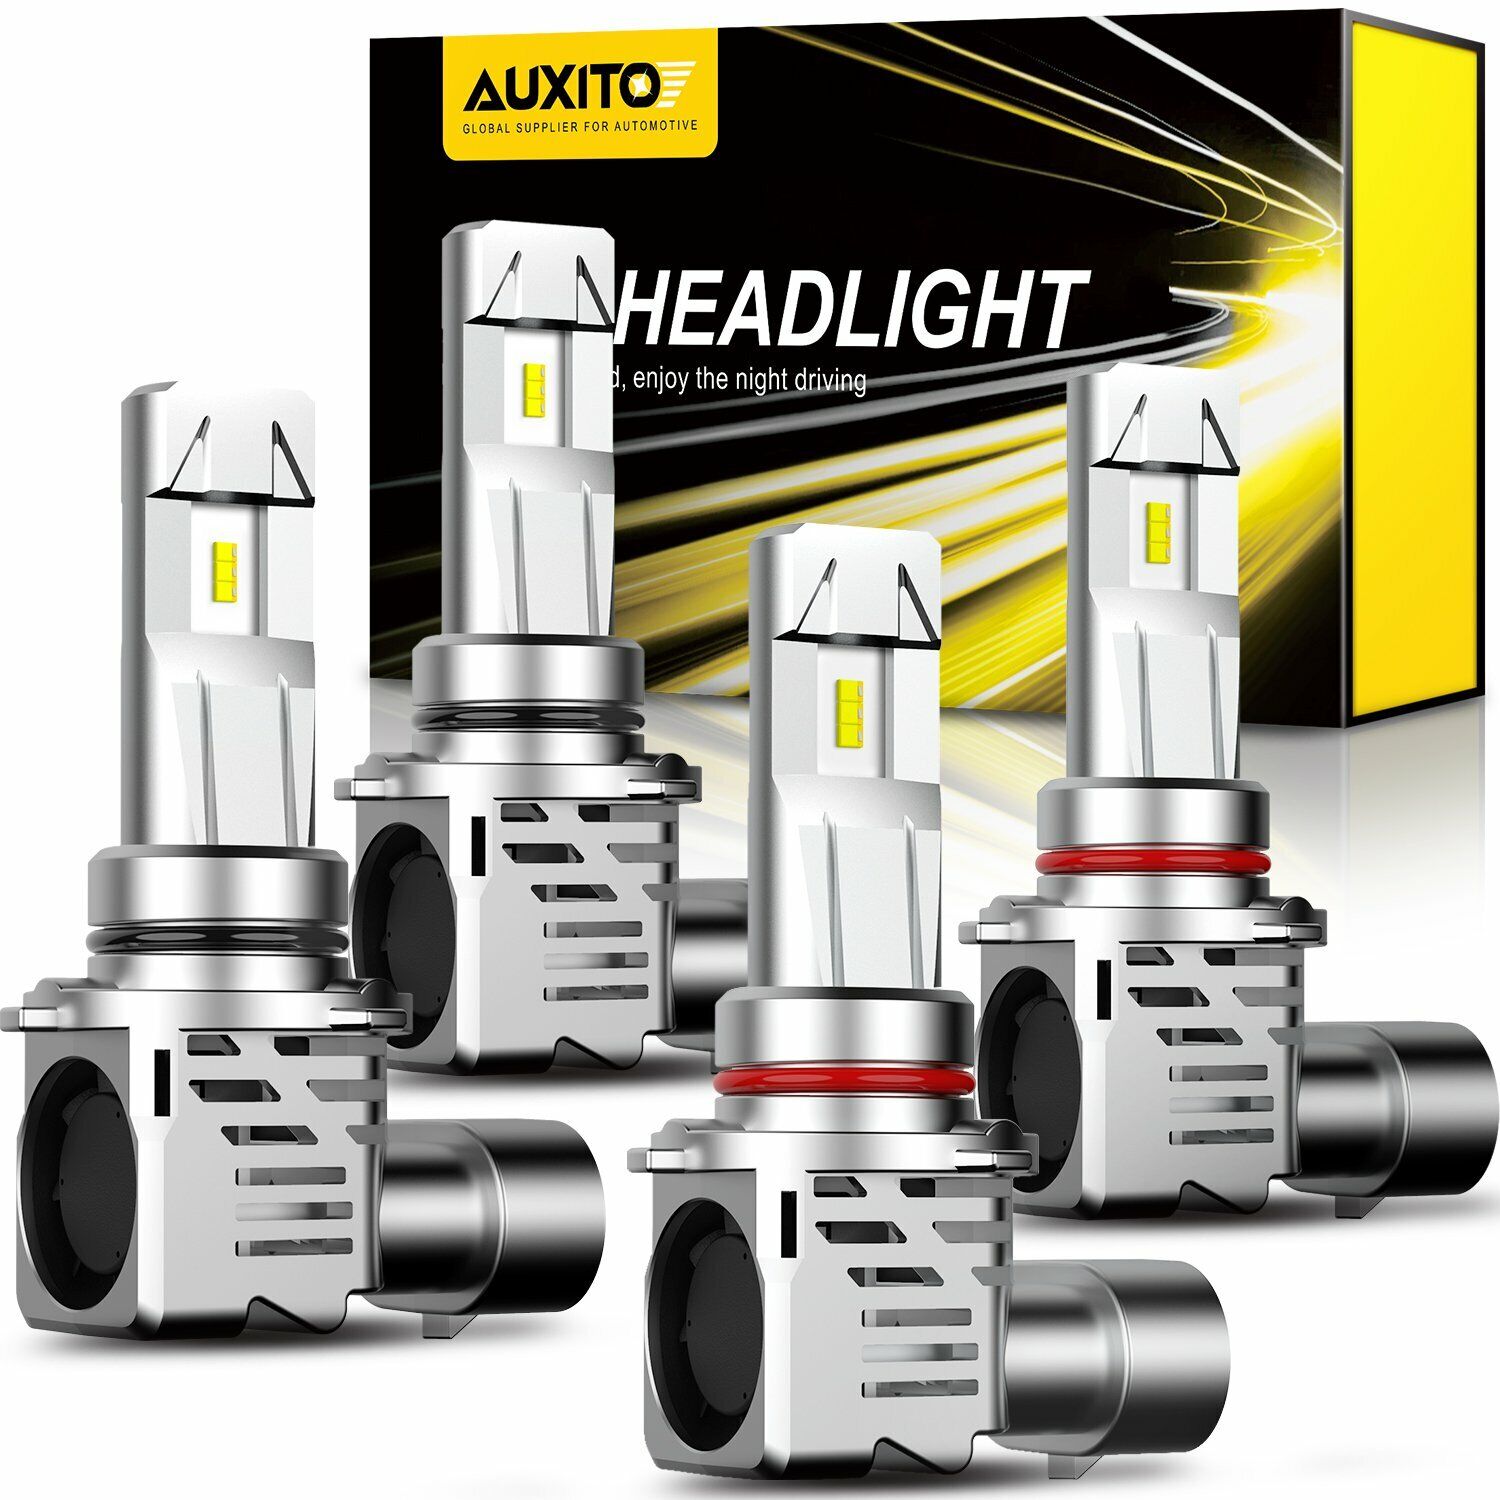 4X AUXITO 9005 9006 LED Headlight Kit Combo Bulb High Low Beam Super White EXC